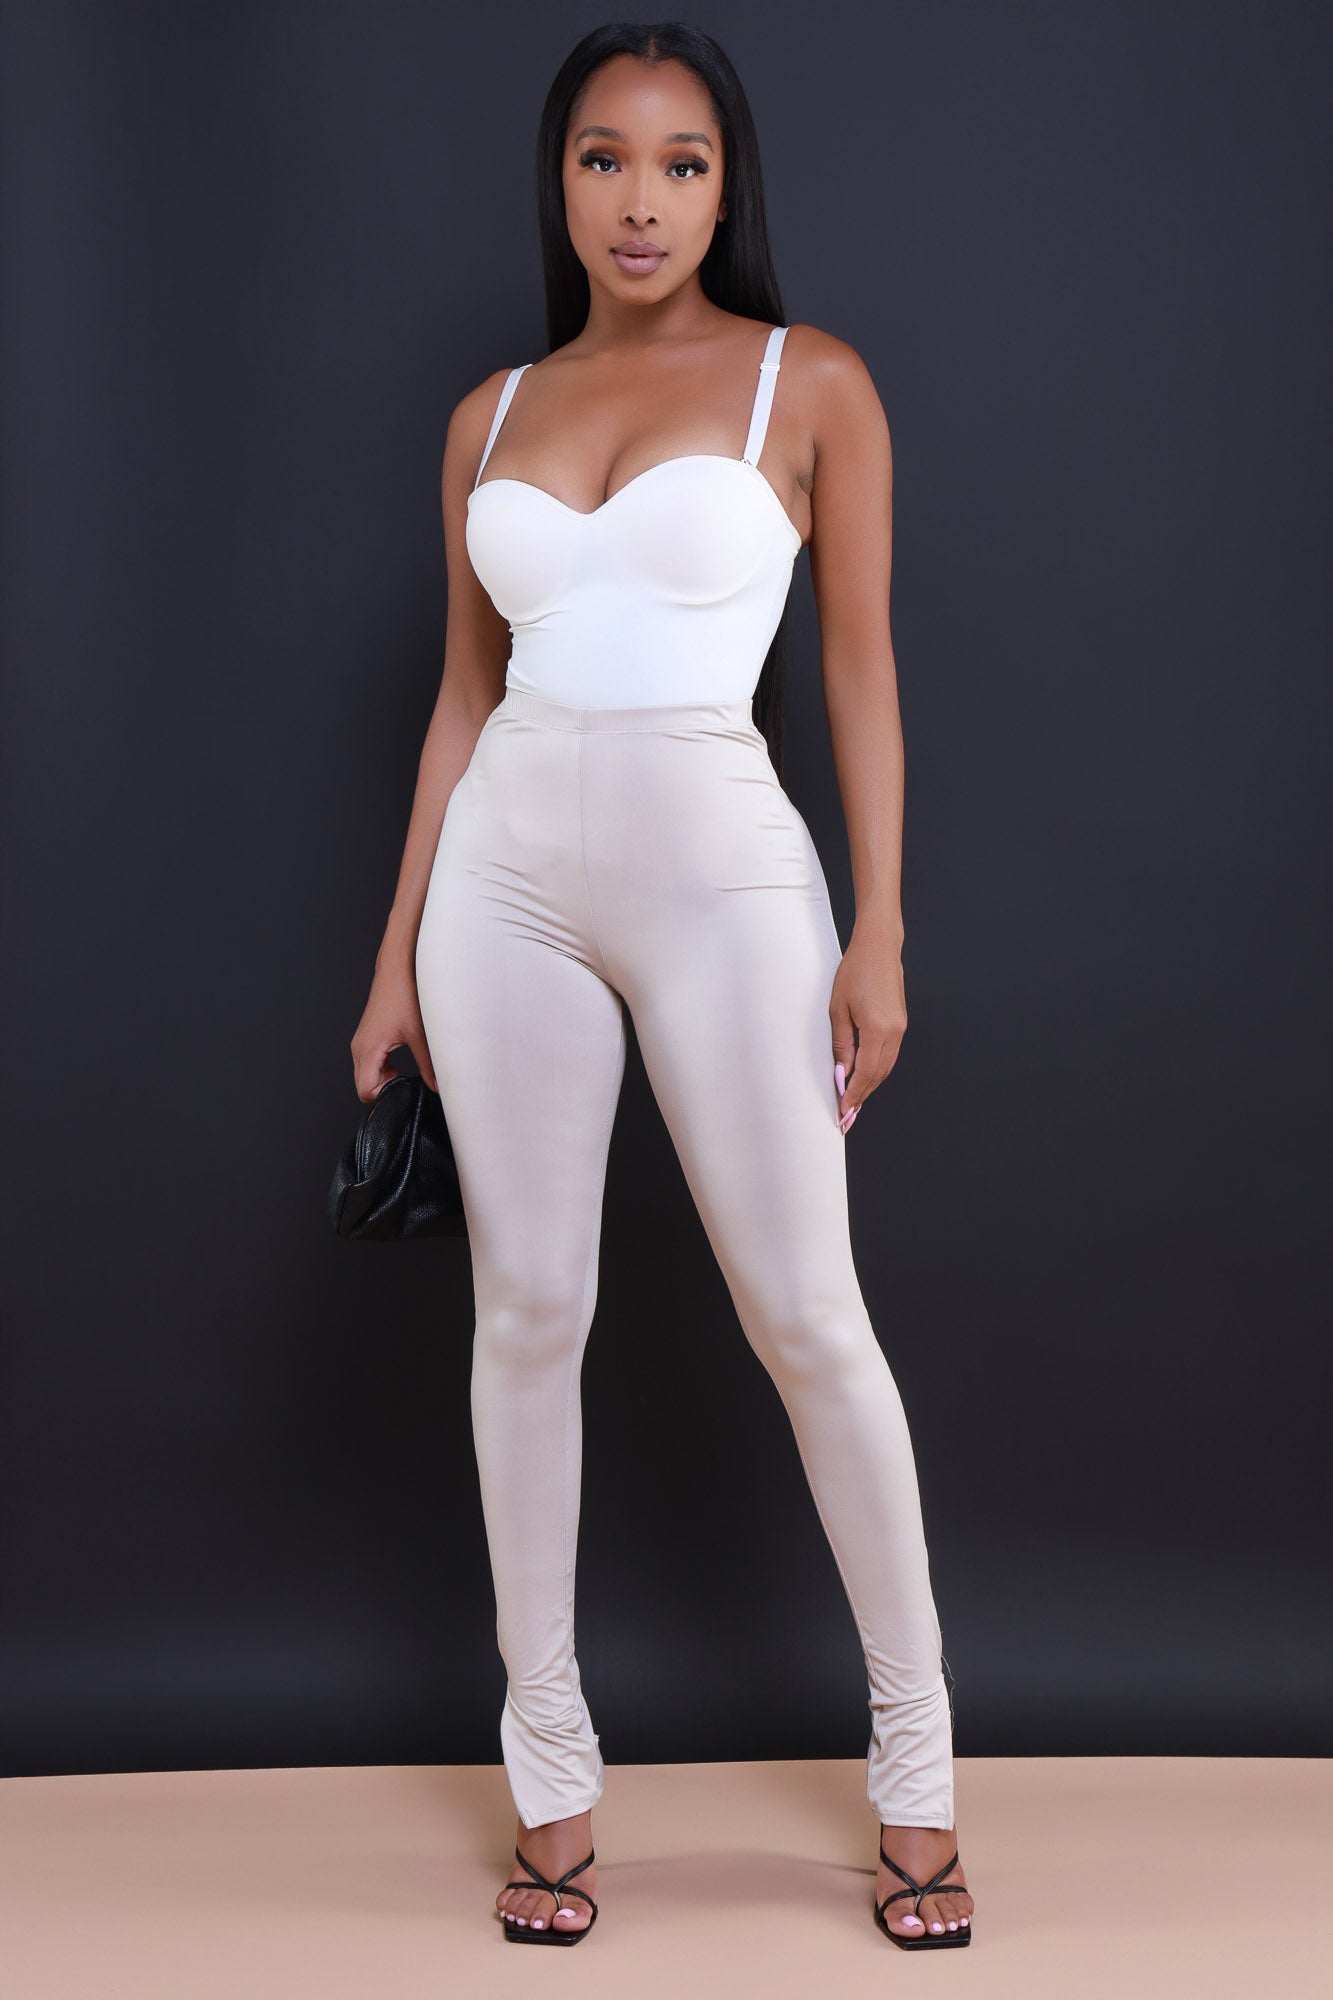 Shapewear Style Guide: Different Shapewears for Multiple Outfits